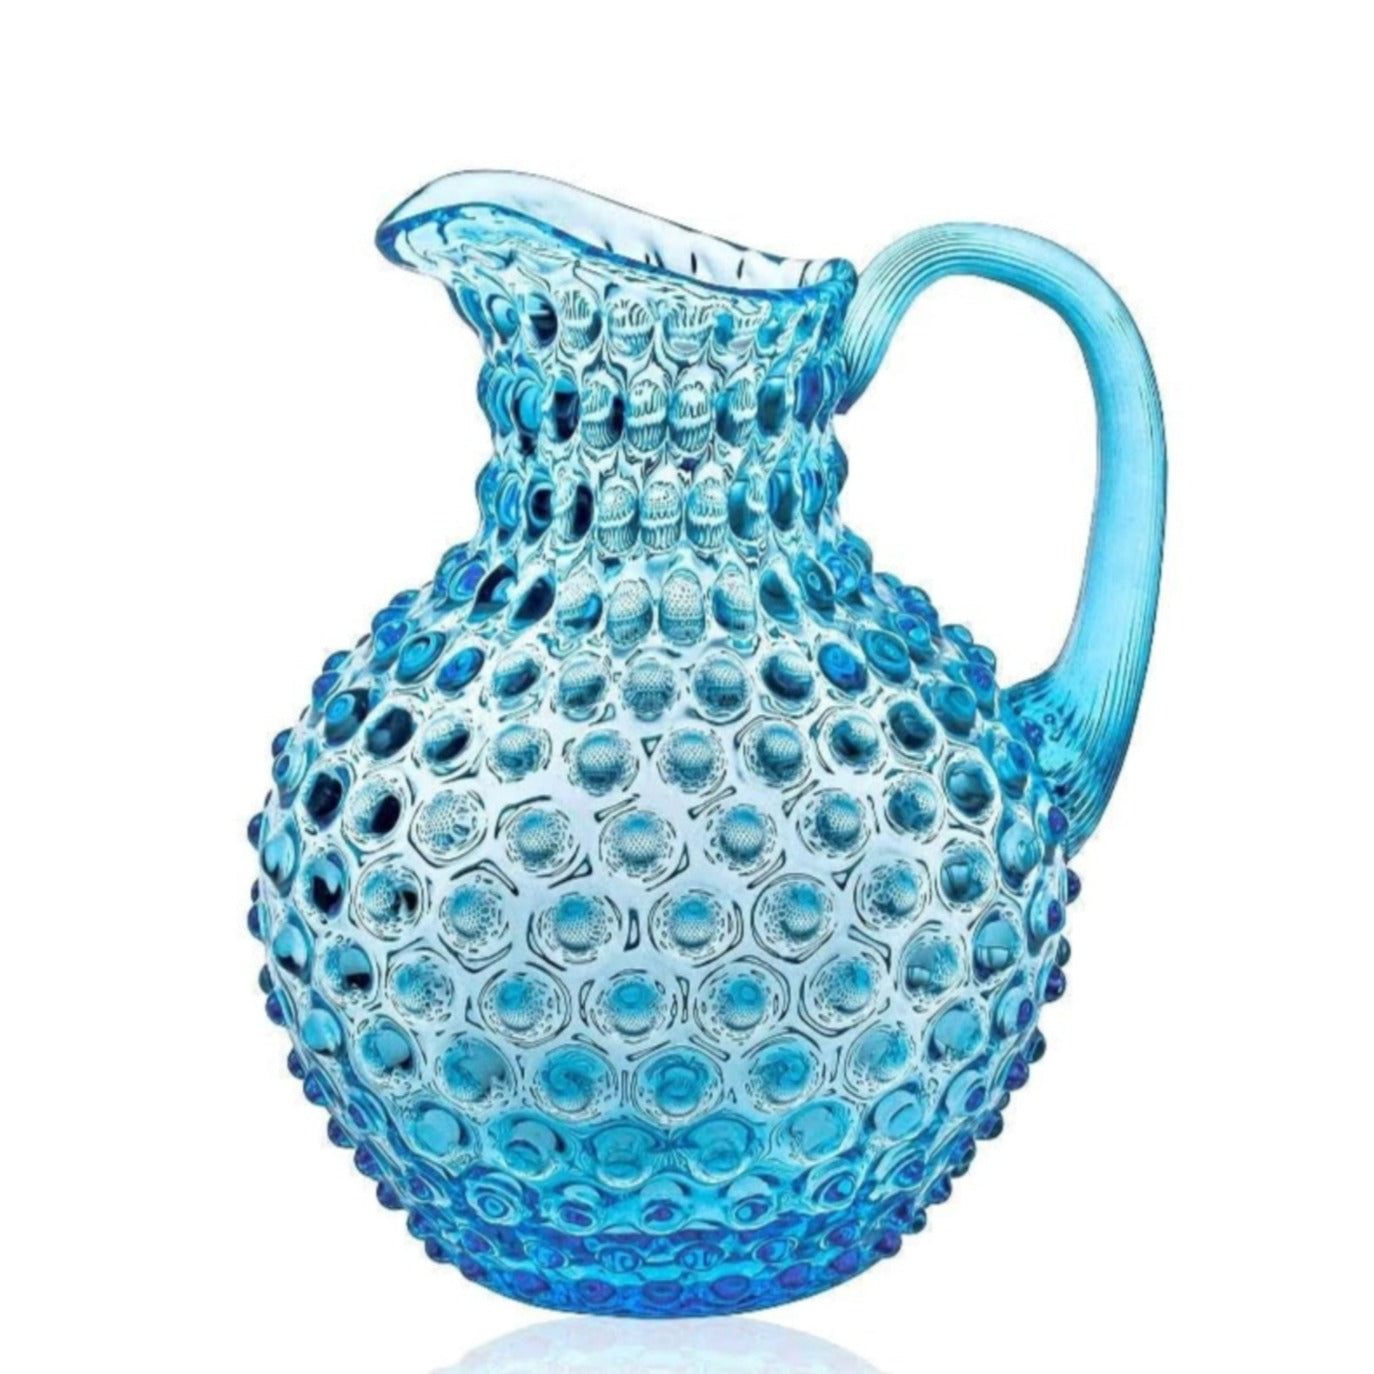 Hobnail Pitcher - Turquoise